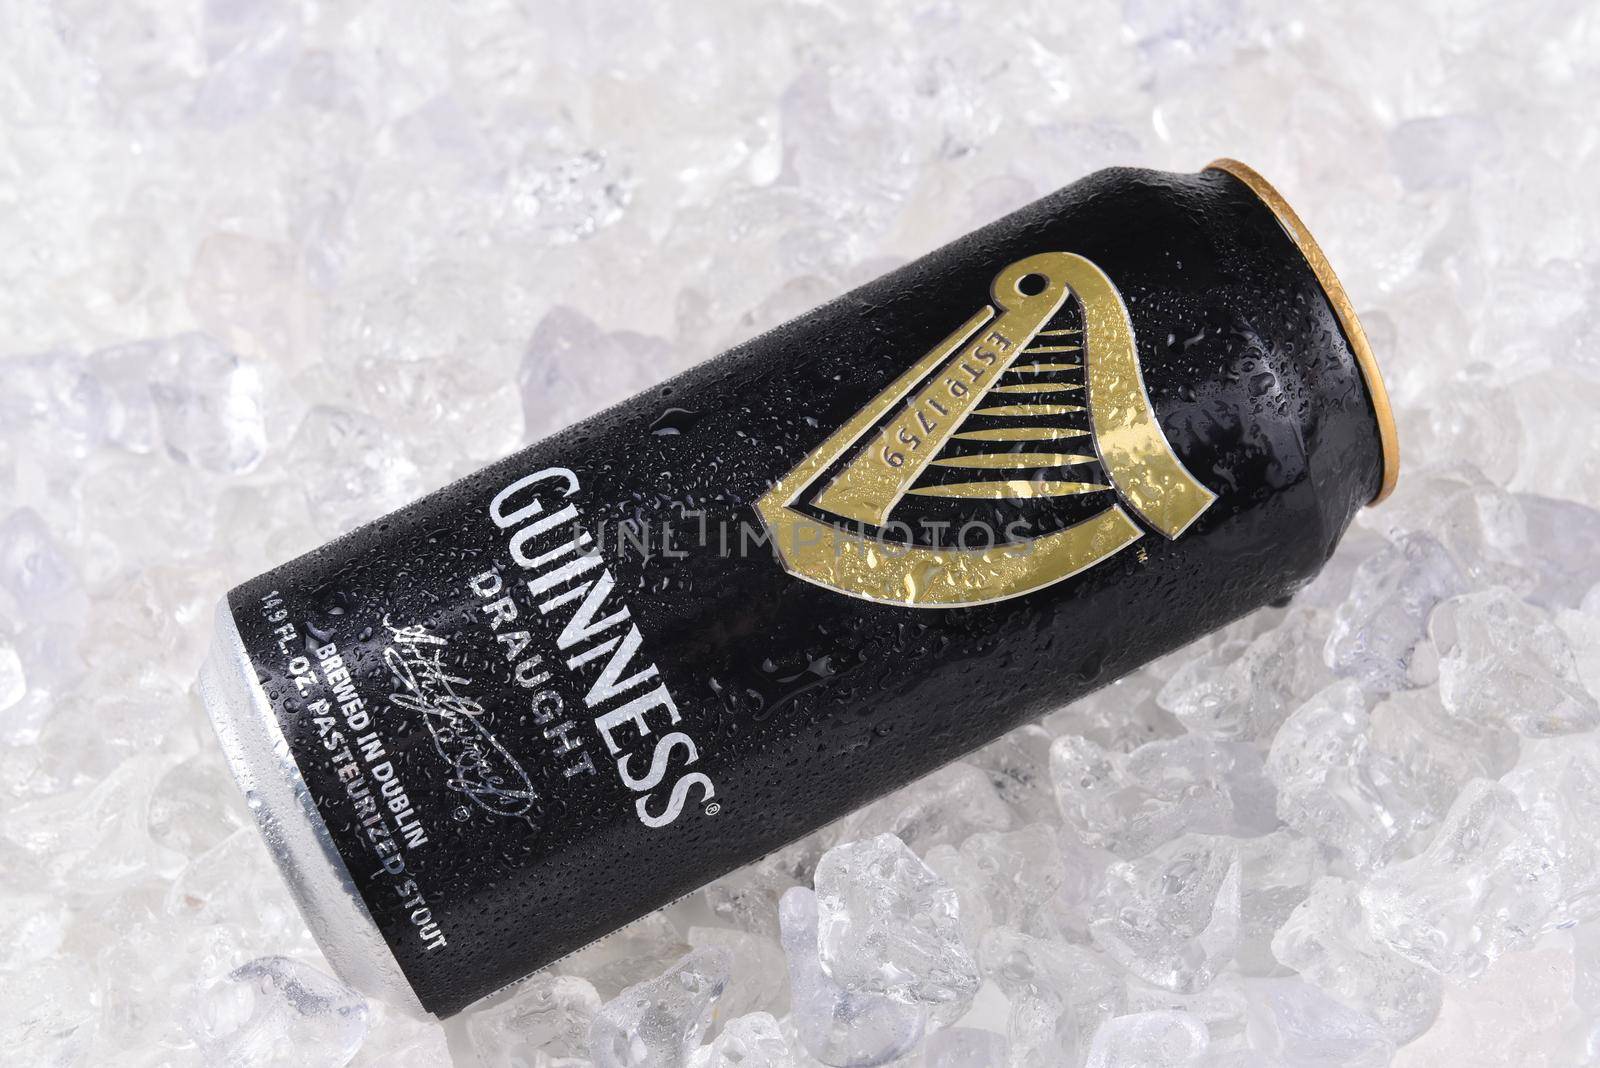 IRVINE, CA - December 15, 2017: A can of Guinness Draught on a bed of ice. The Irish beer is one of the worlds most successful beer brands with annual sales over 850 million liters.